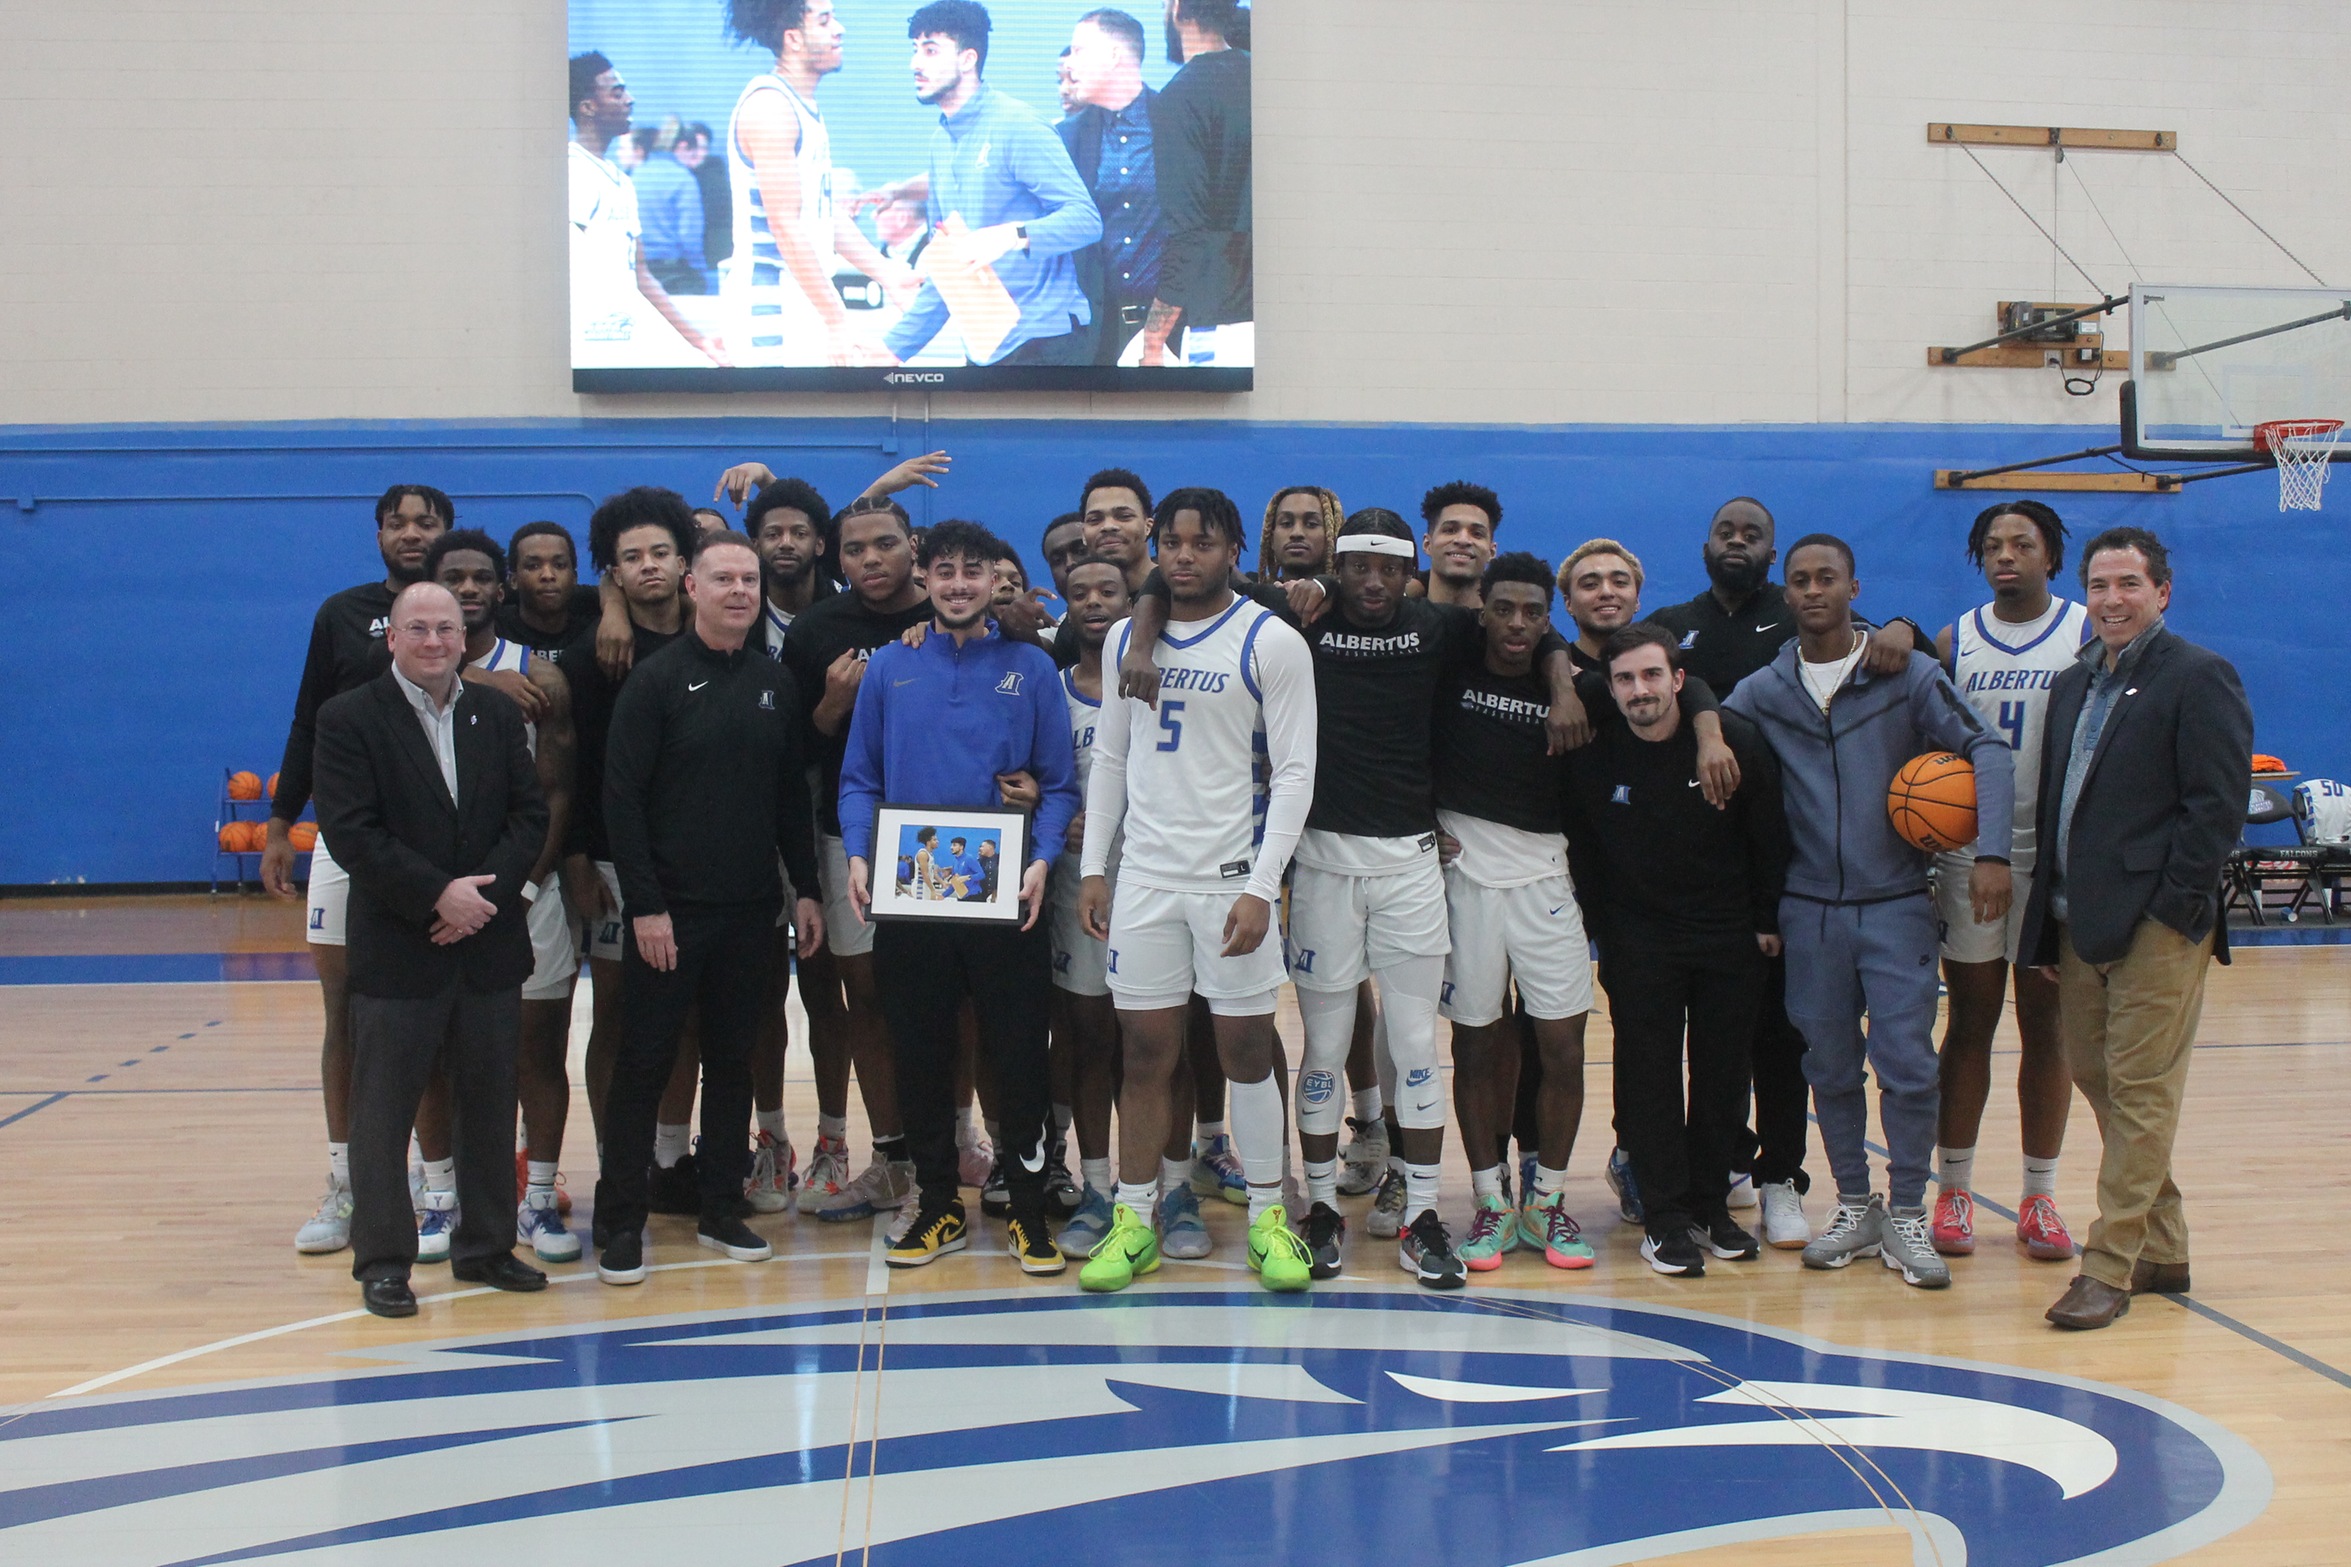 Men's Basketball Concludes Regular Season with Thrilling Victory Over Lasell on Senior Day